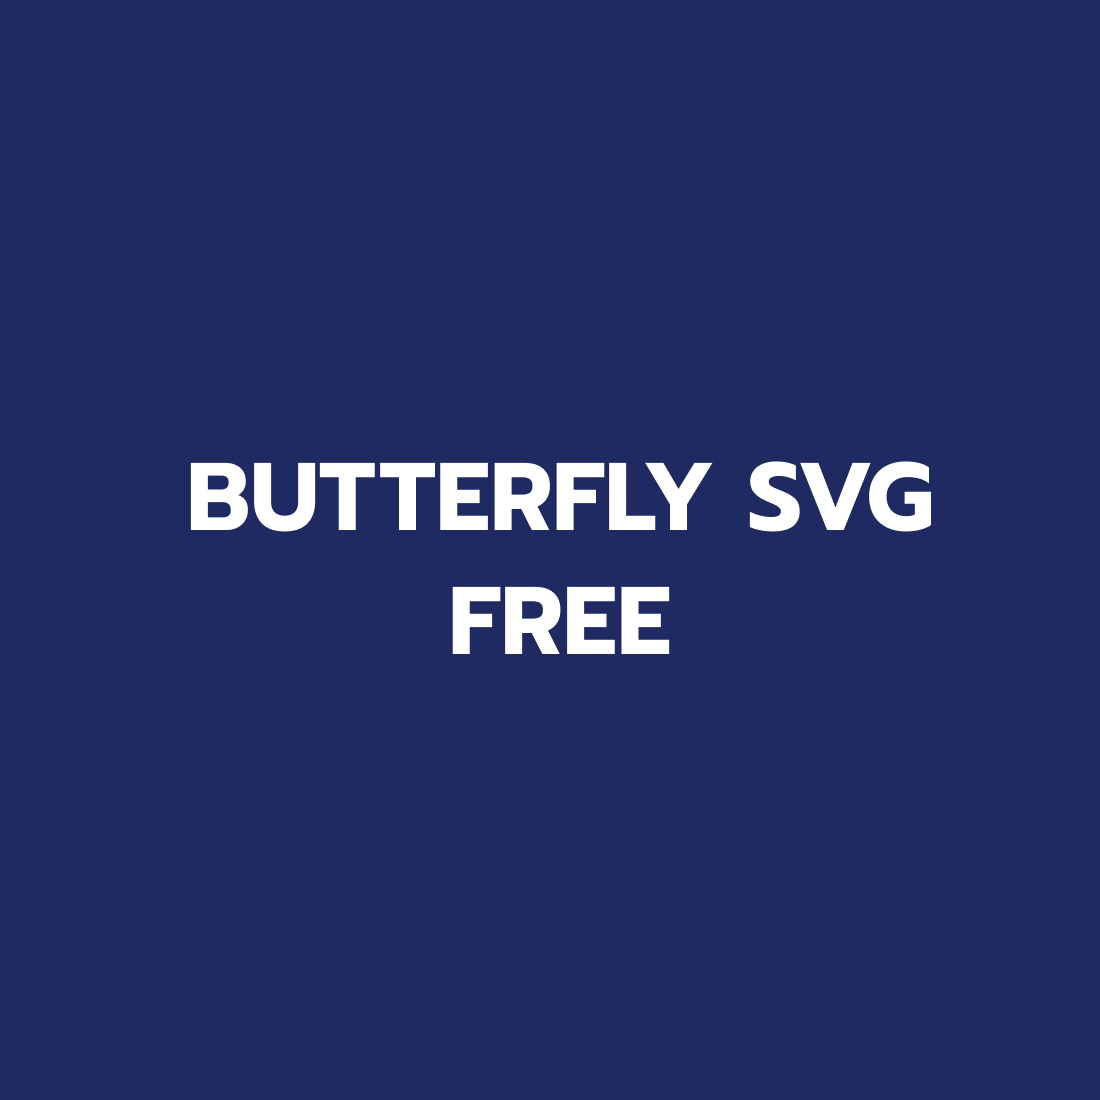 Butterfly SVG Free preview image.